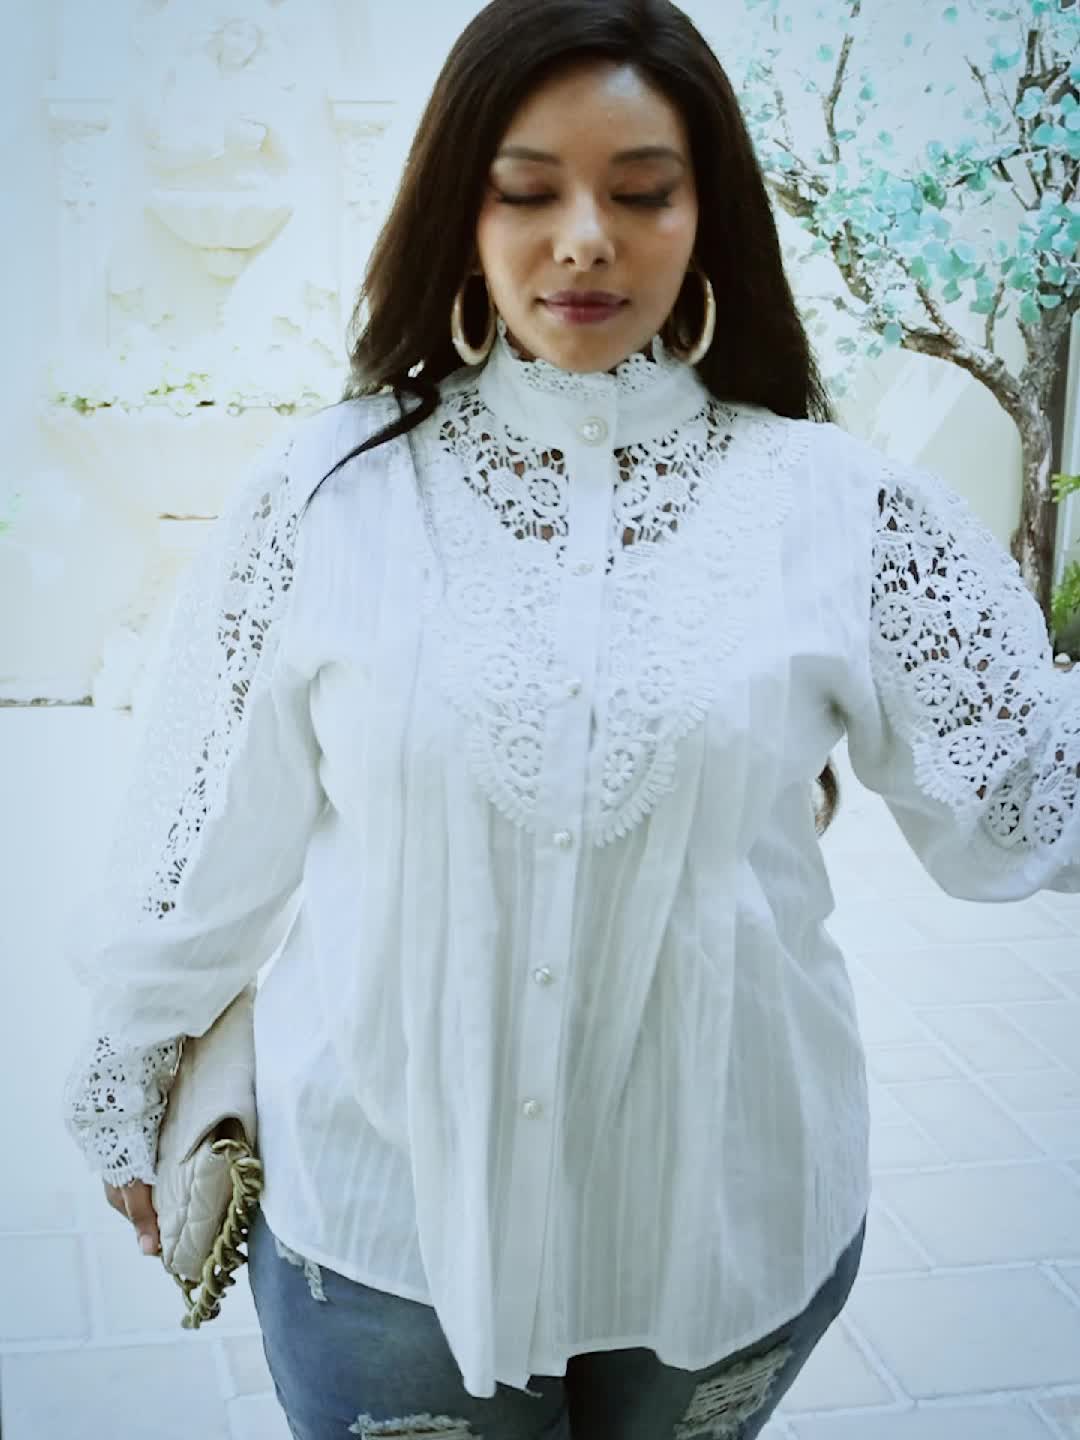 A woman wearing a white Maramalive™ Plus Size Elegant Blouse, Women's Plus Solid Contrast Lace Lantern Sleeve Button Up Mock Neck Shirt Top and holding a beige clutch stands outdoors against a light-colored background, with greenery visible in the distance. She is looking slightly downward.